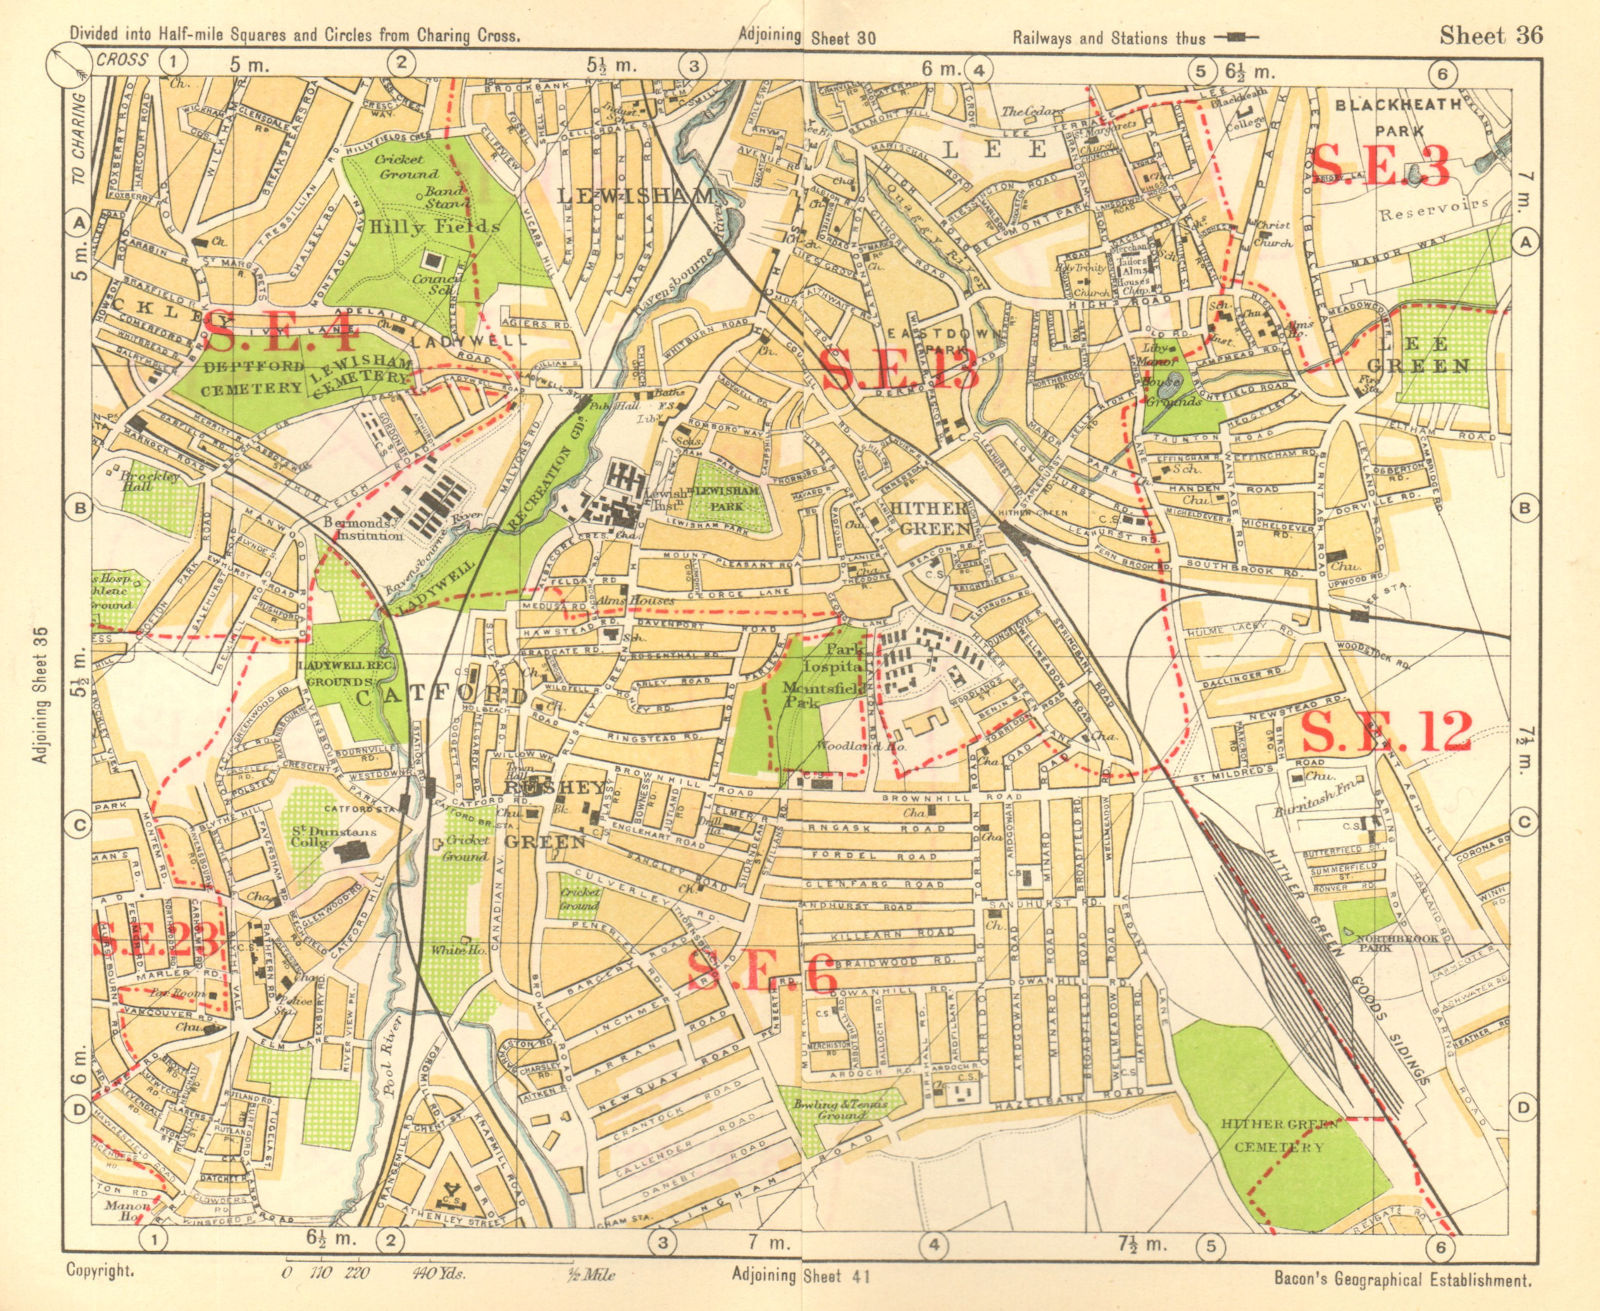 SE LONDON. Catford Hither/Rushey/Lee Green Lewisham Ladywell. BACON 1928 map